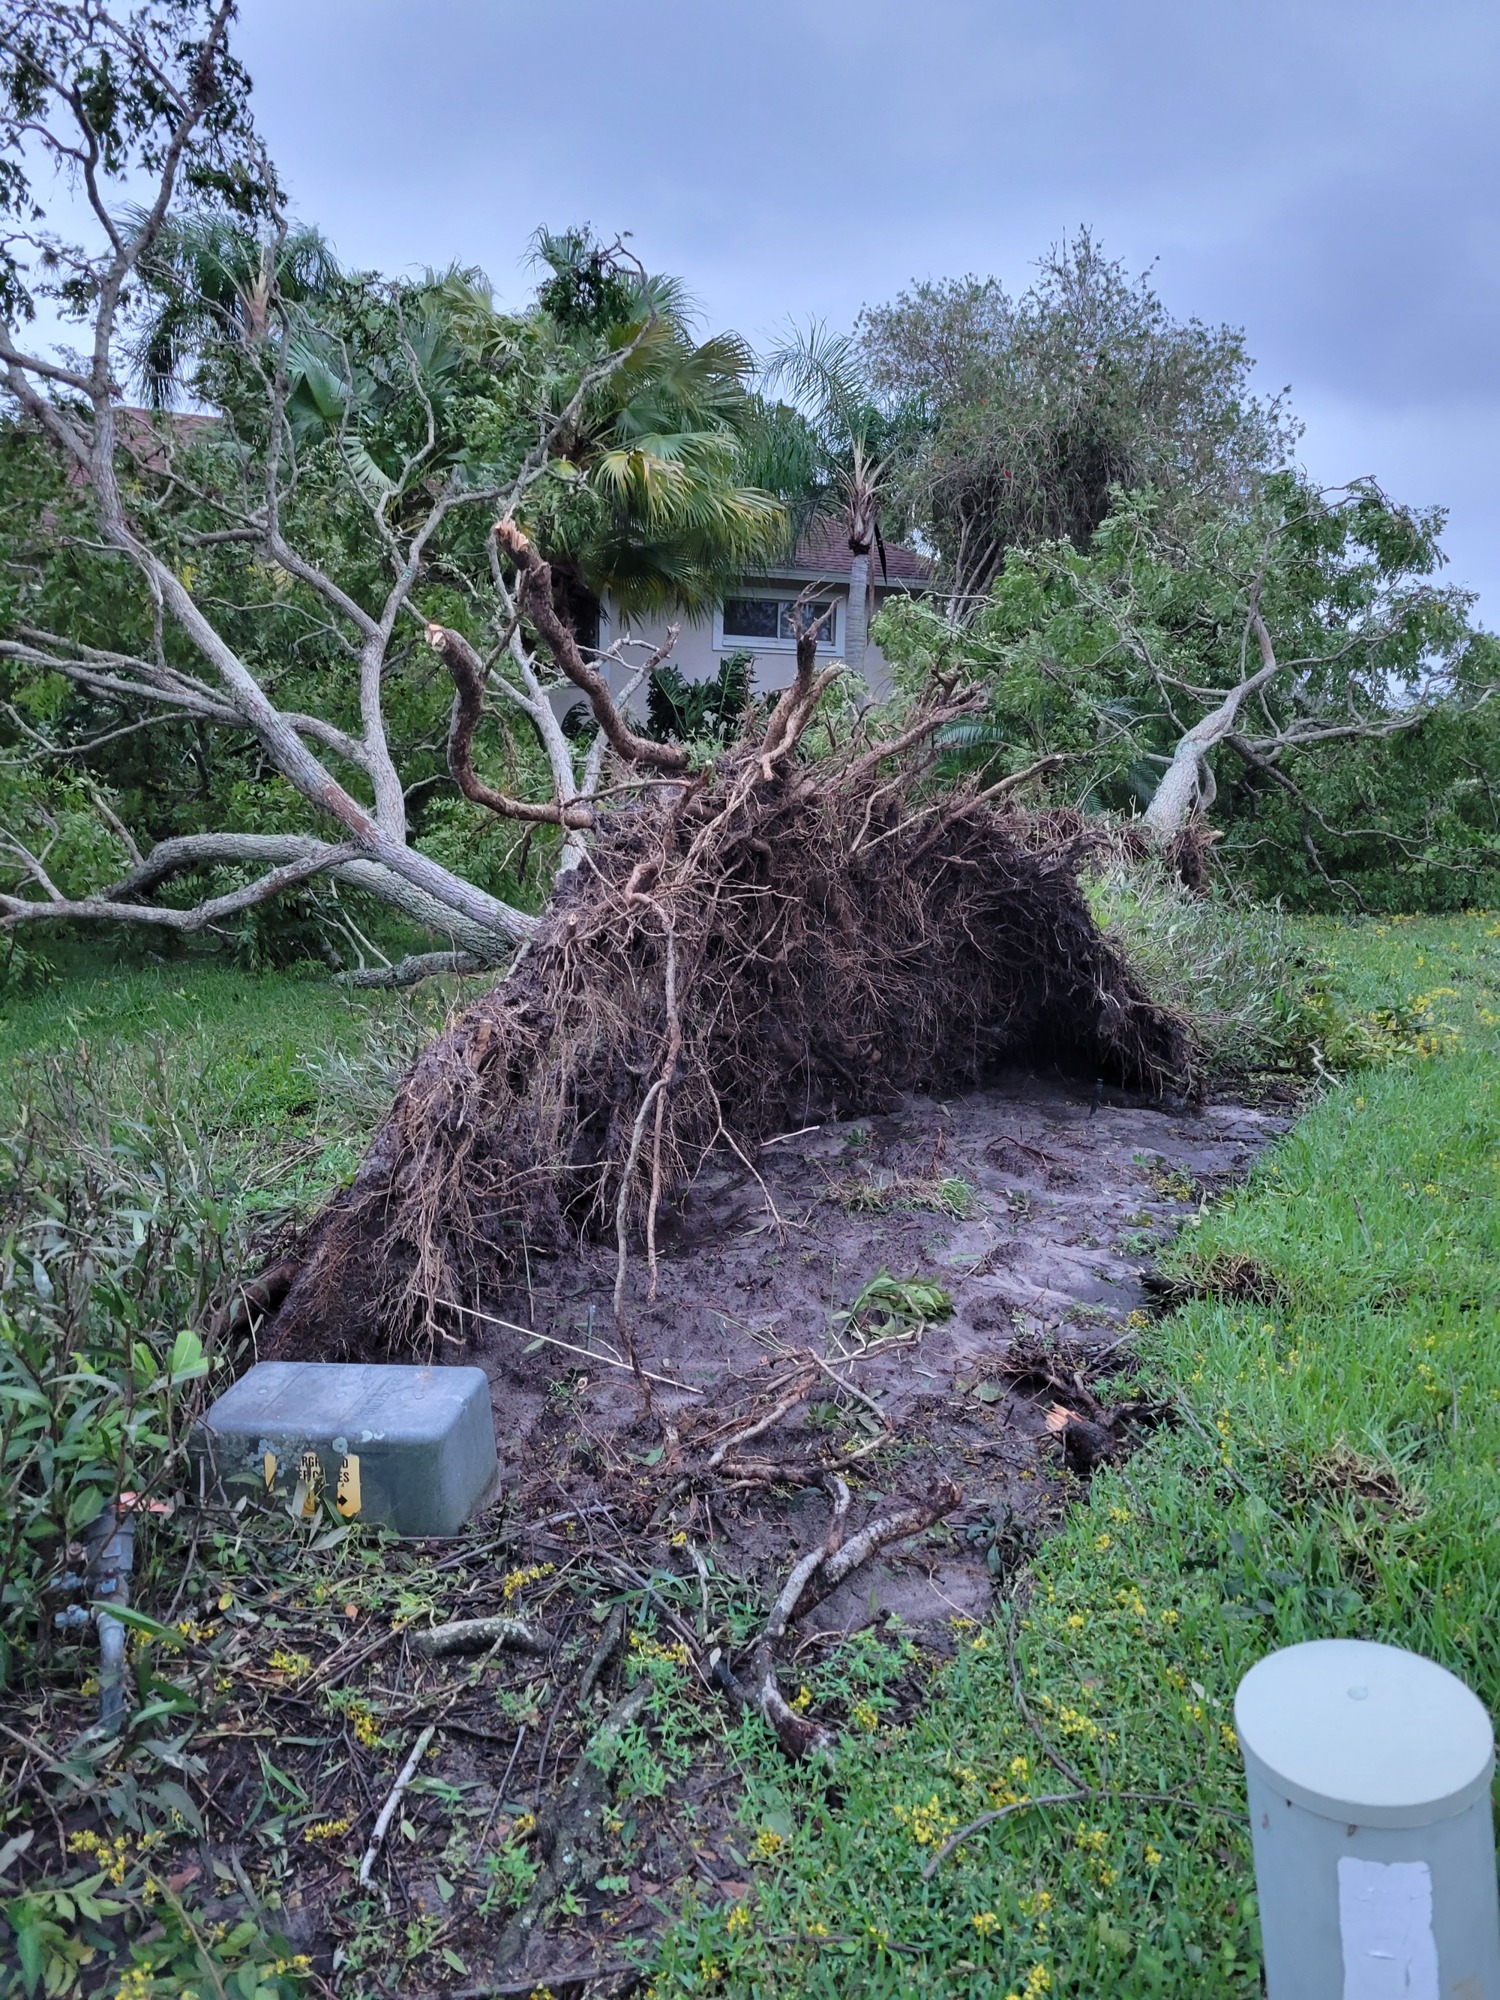 Susie DAessandro sent in a photo of two trees uprooted in River Club in East County.